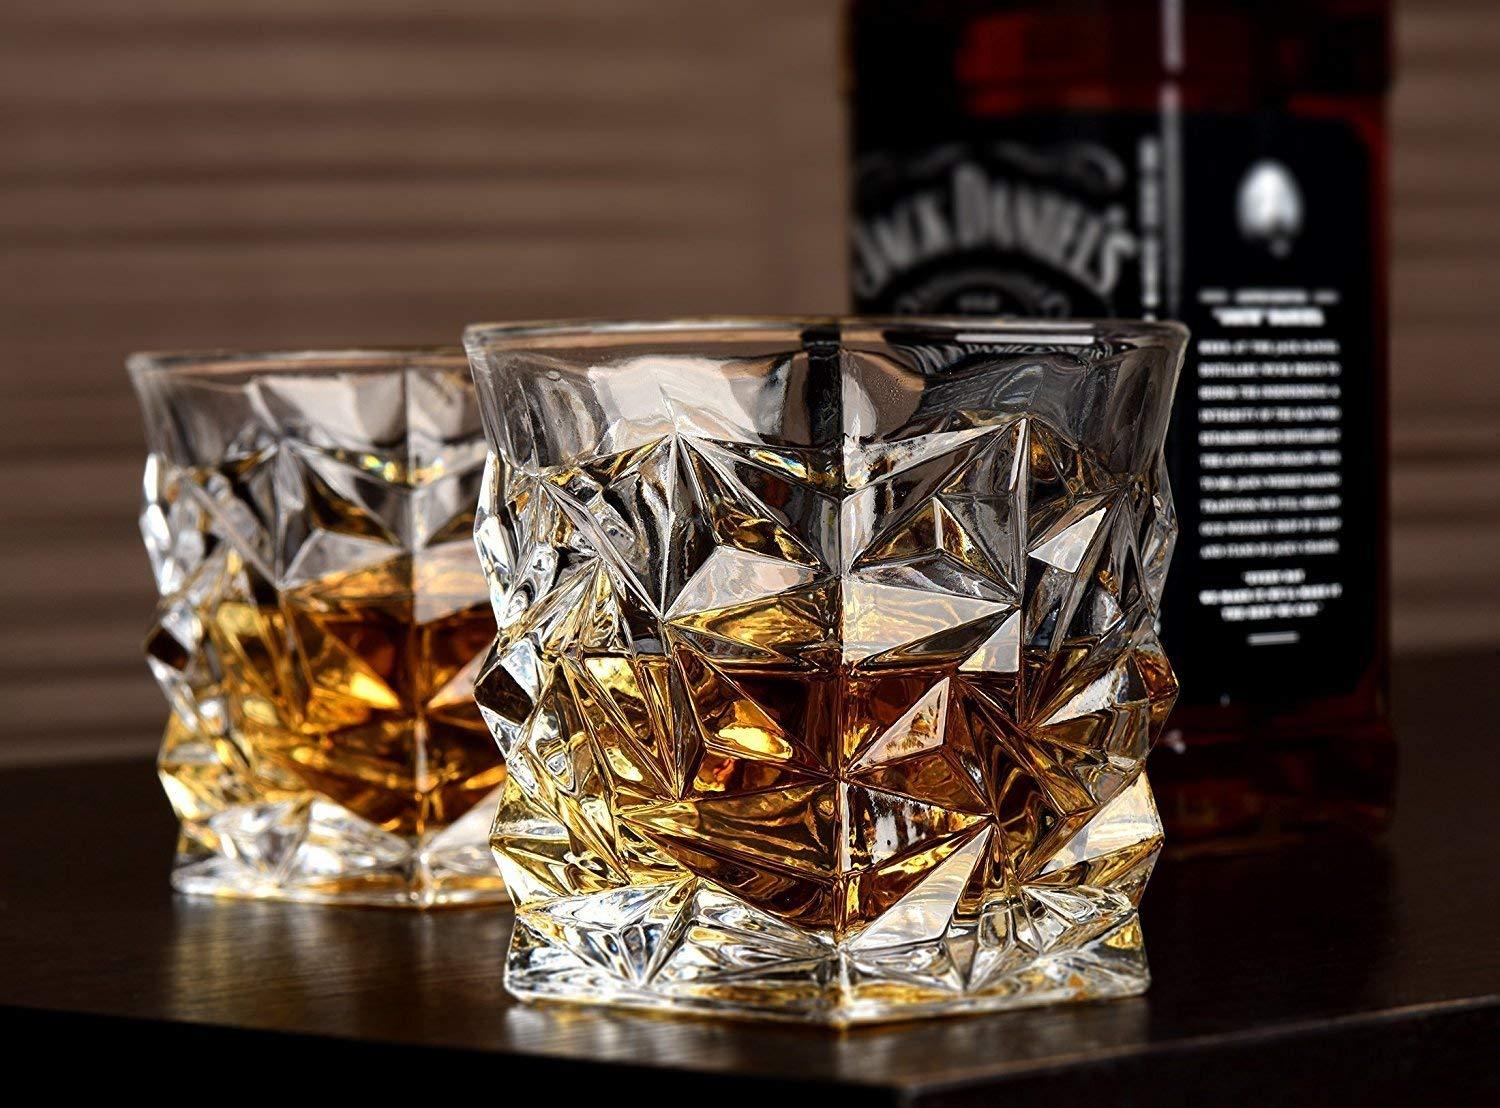 Diamond Crystal Cut Whiskey Glasses Set of 6 pcs- 300 ml Bar Glass for Drinking Bourbon, Whisky, Scotch, Cocktails, Cognac- Old Fashioned Cocktail Tumblers - CraftEmporio